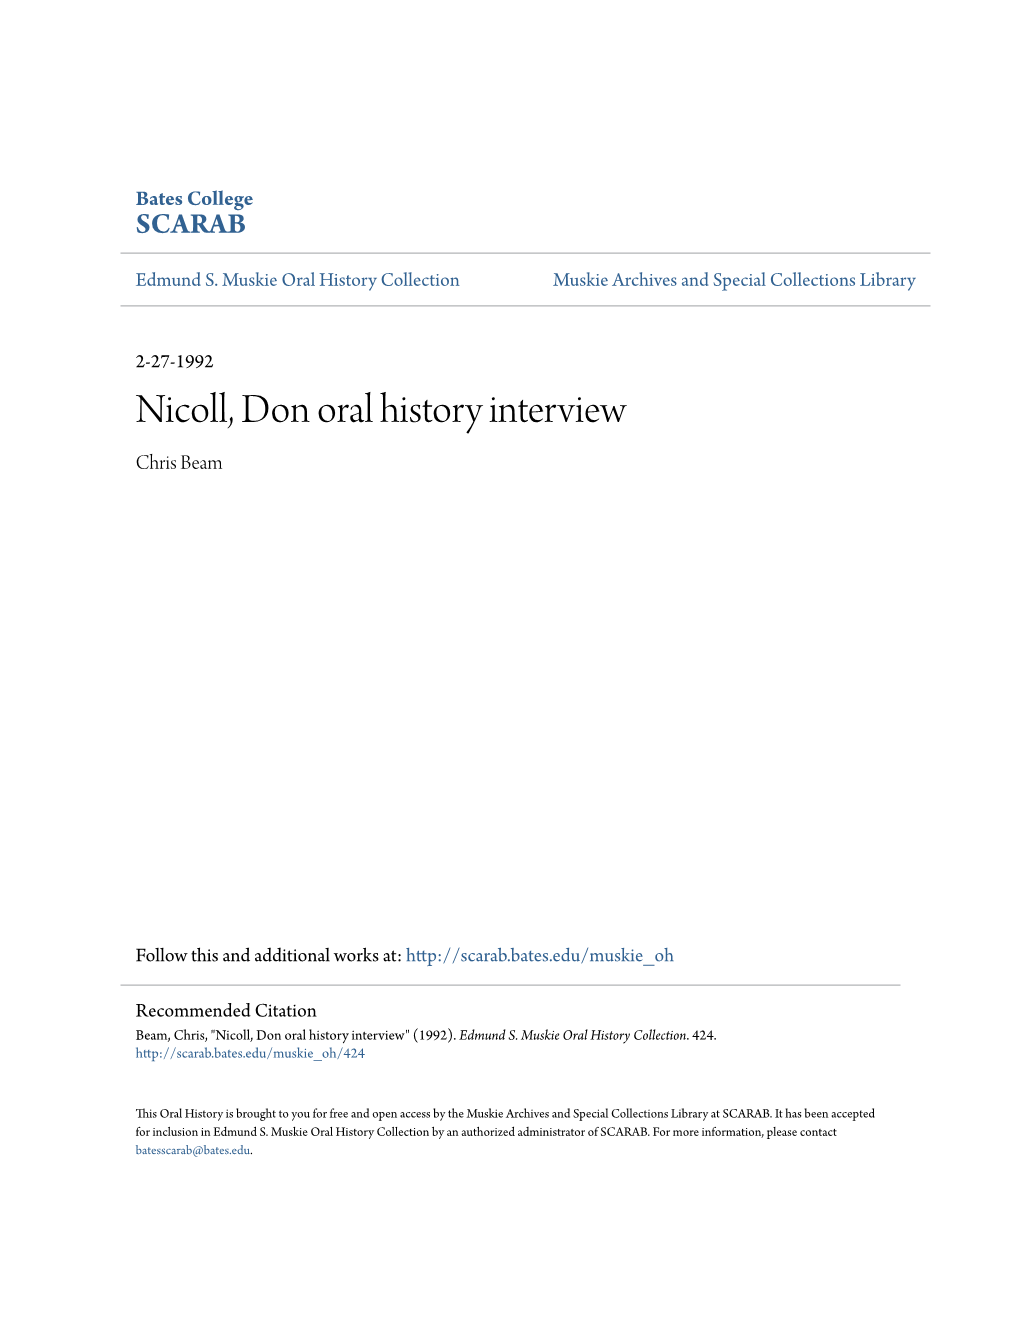 Nicoll, Don Oral History Interview Chris Beam